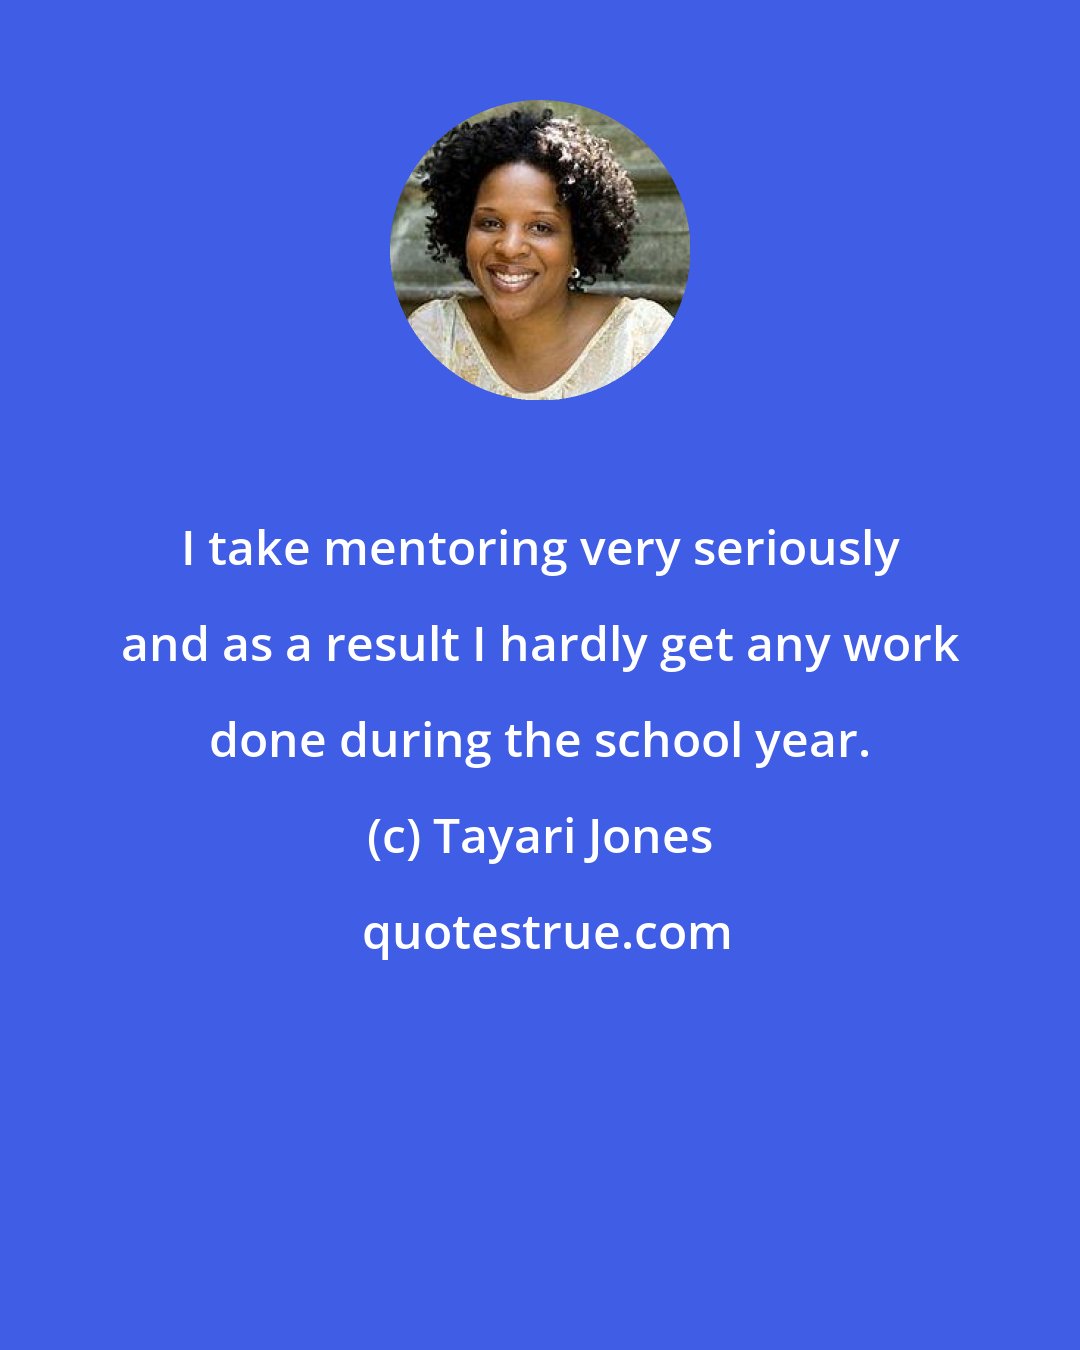 Tayari Jones: I take mentoring very seriously and as a result I hardly get any work done during the school year.